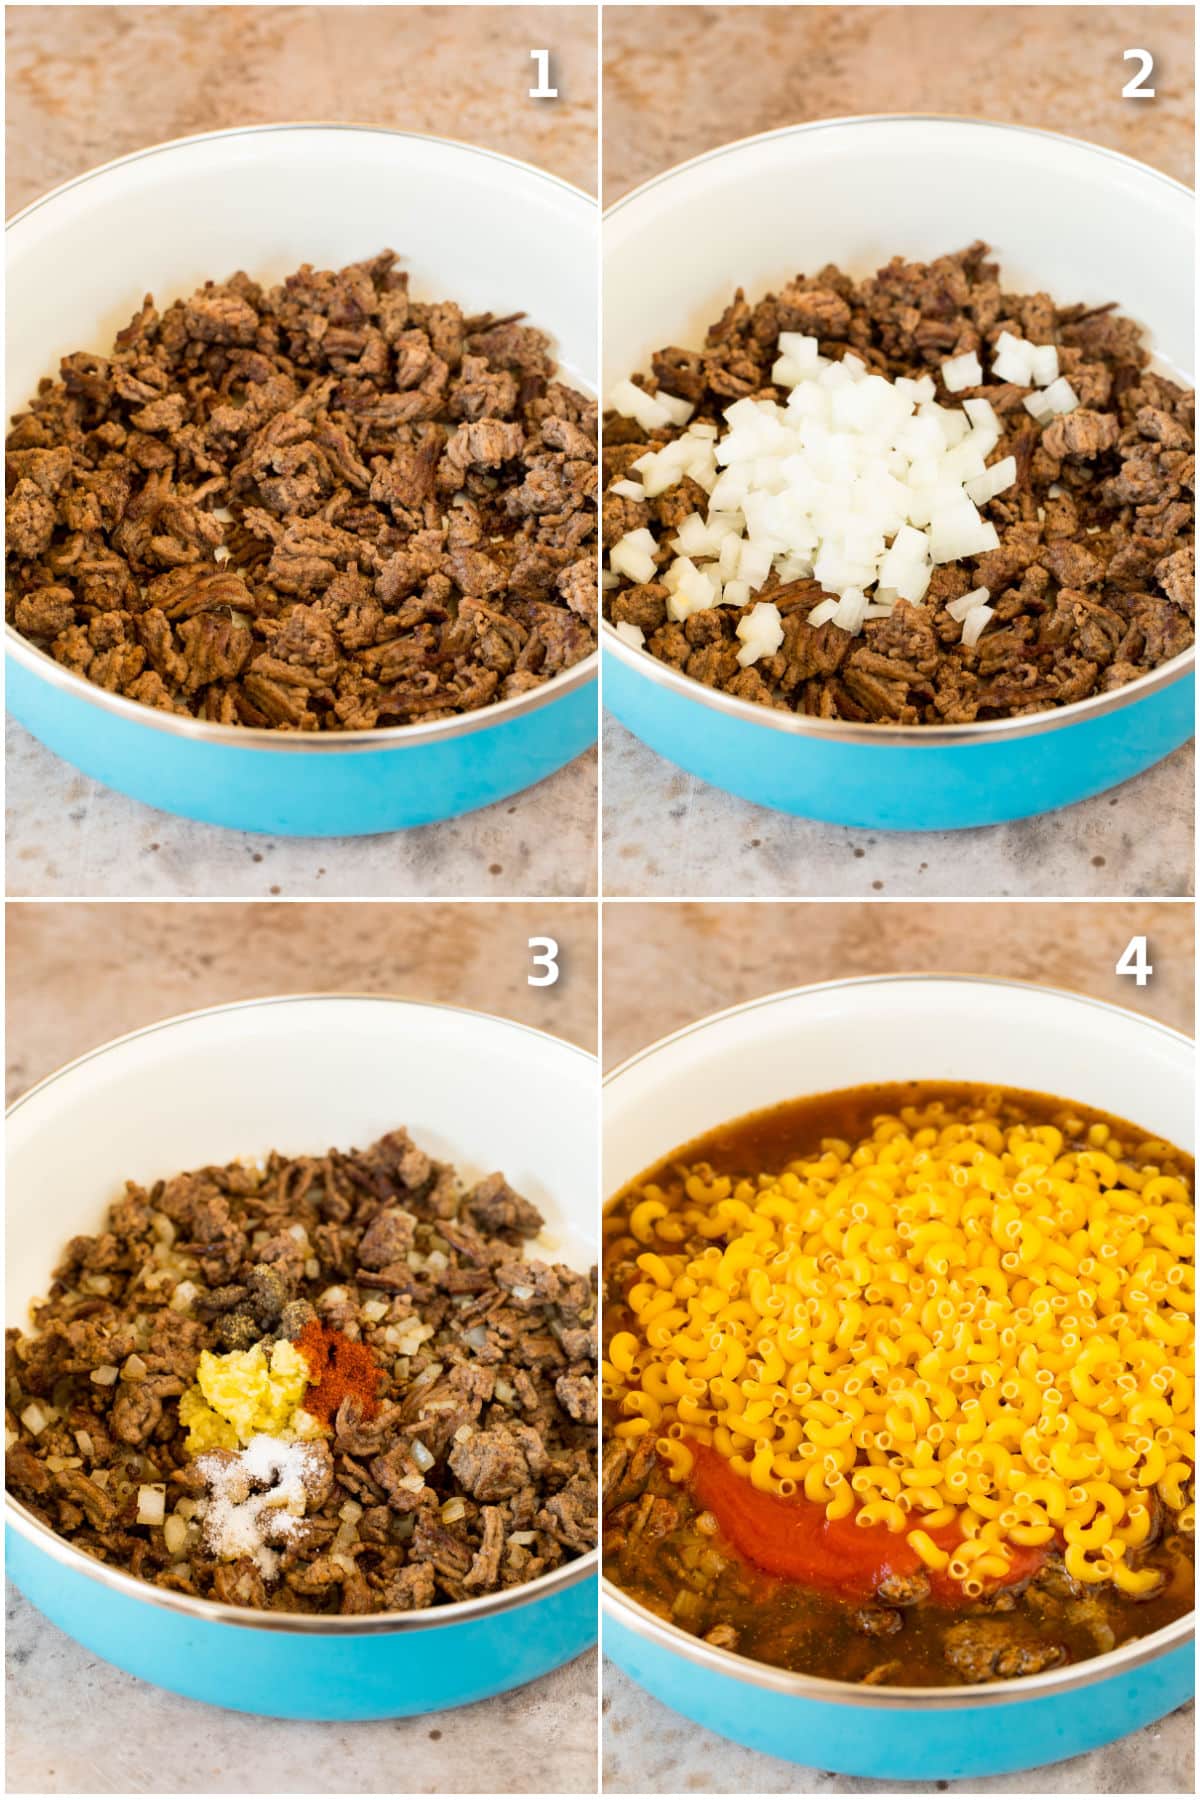 Process shots showing how to brown and season ground beef, and pasta with sauce in a pot.